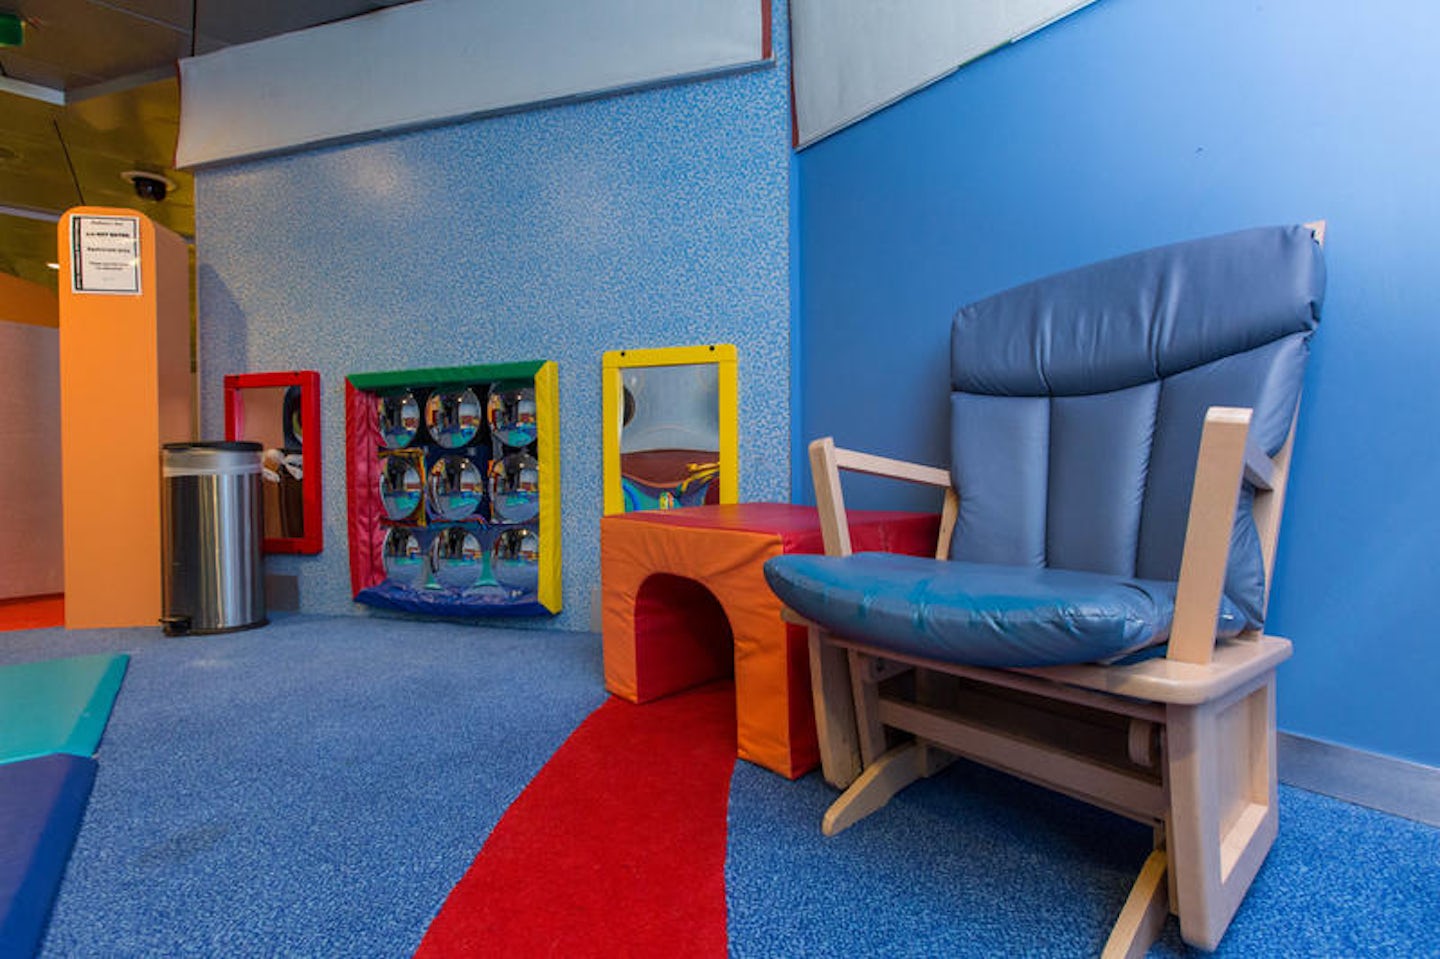 Royal Babies and Tots Nursery on Radiance of the Seas